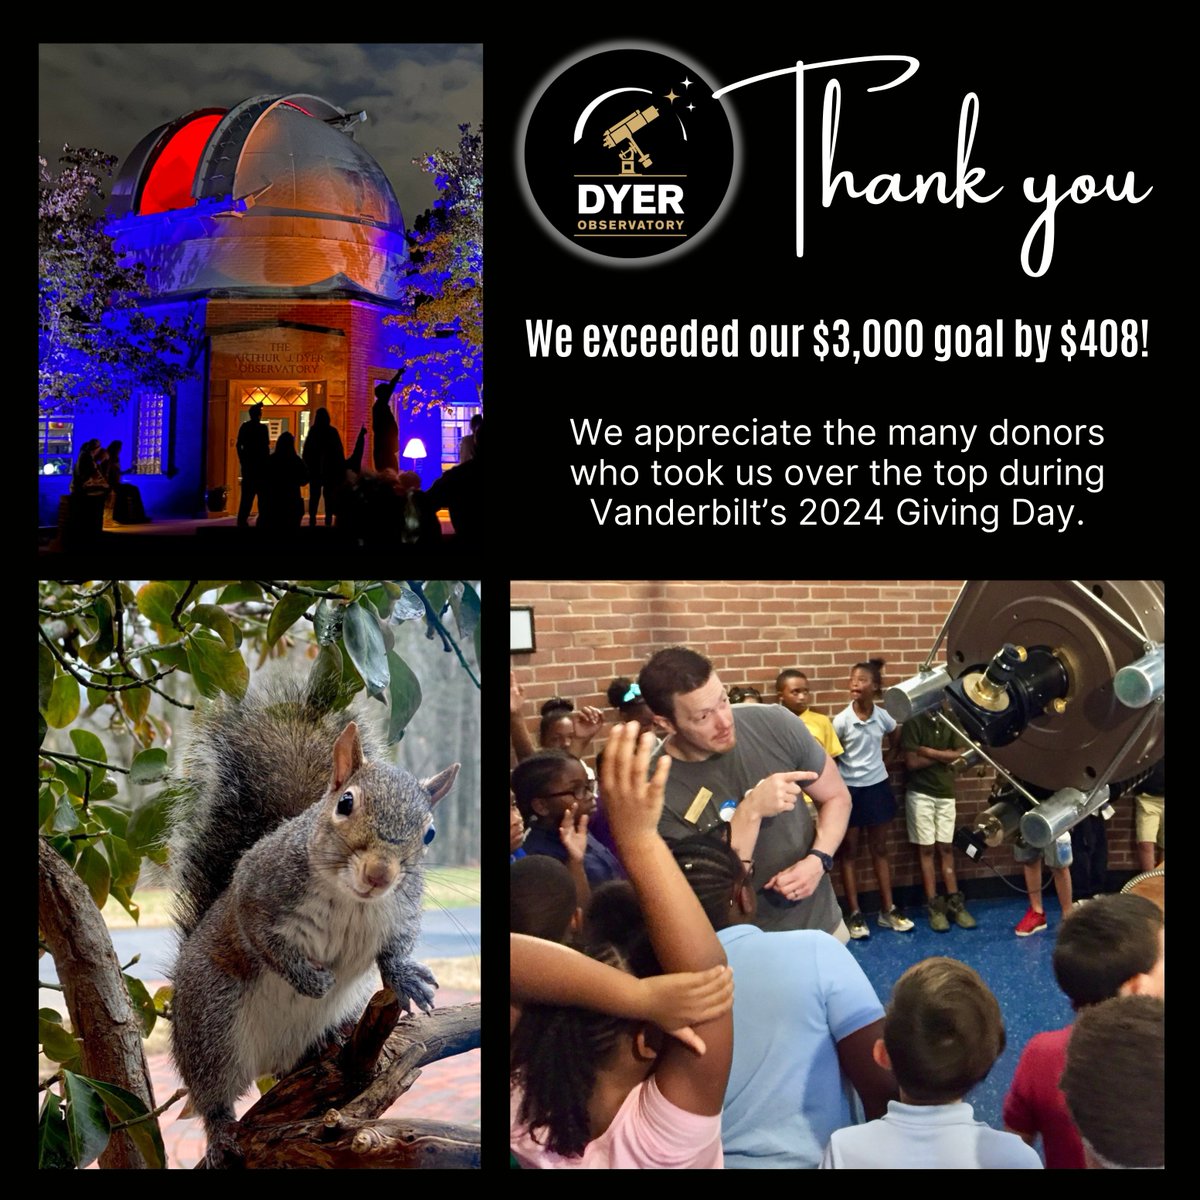 Sixty generous donors gave $3,233 to our general fund and $175 to our endowment. Dr. Billy Teets and the Dyer team will put those funds to good use, and we hope to see you soon!

#vu4life #givingday #dyerobservatory #drbillyteets #vandygram